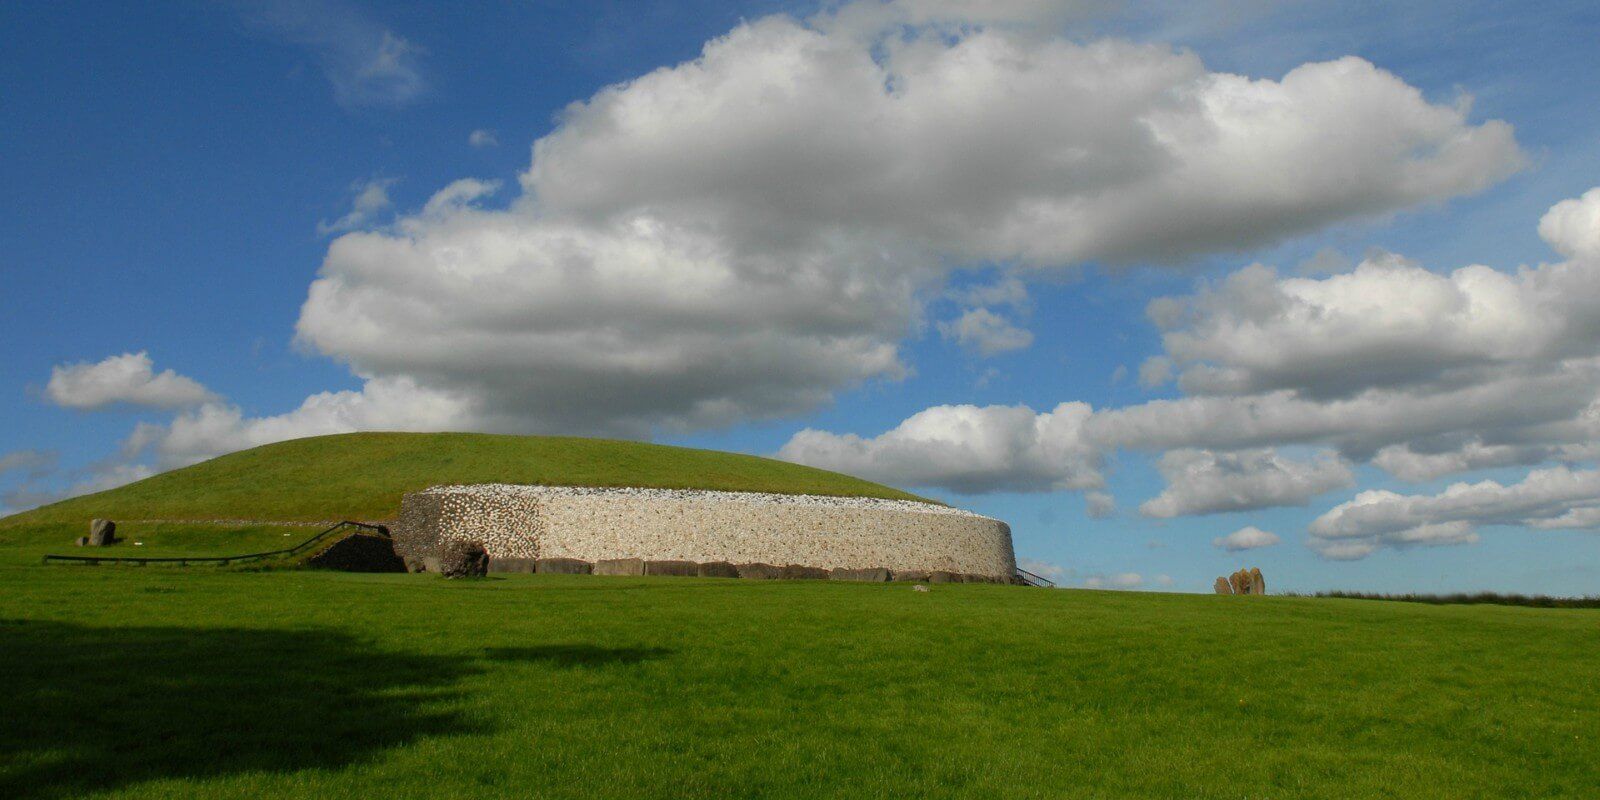 Newgrange in the Boyne Valley is a 5000 year old Passage Tomb famous for the Winter Solstice illumination which lights up the passage and chamber at sunrise